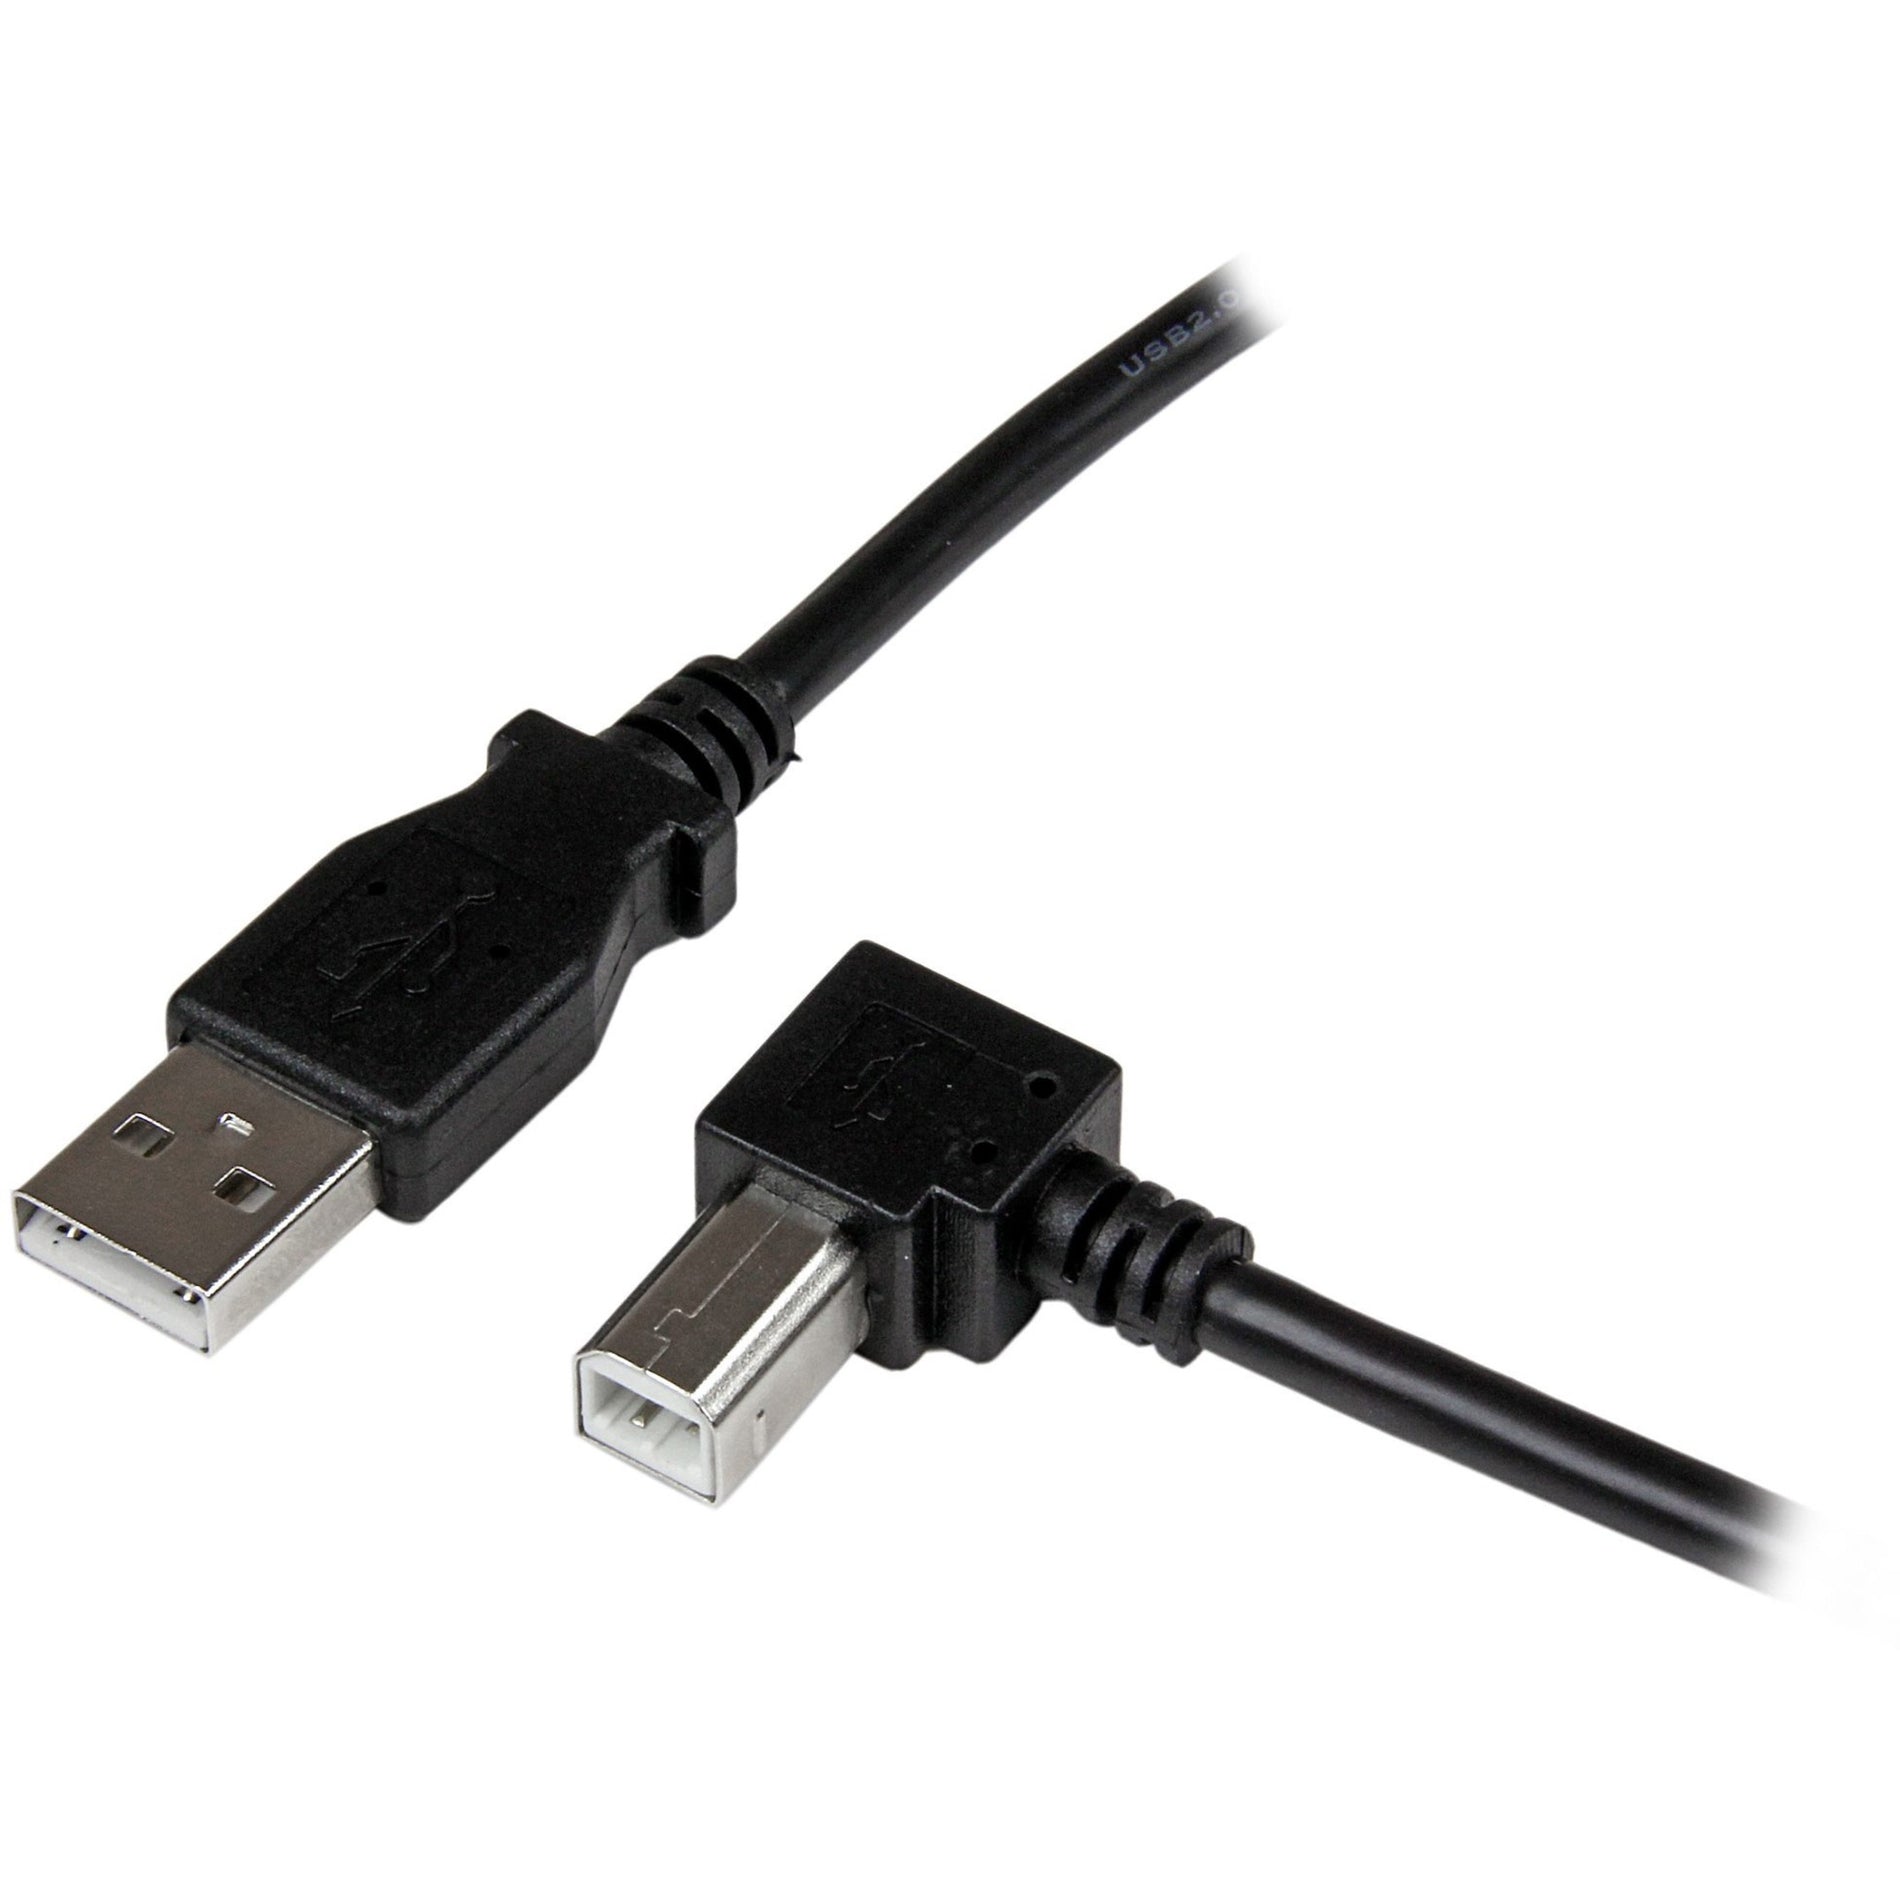 StarTech.com USBAB1MR 1m USB 2.0 A to Right Angle B Cable - M/M, 480 Mbit/s Data Transfer Rate, for Scanner, Printer, External Hard Drive